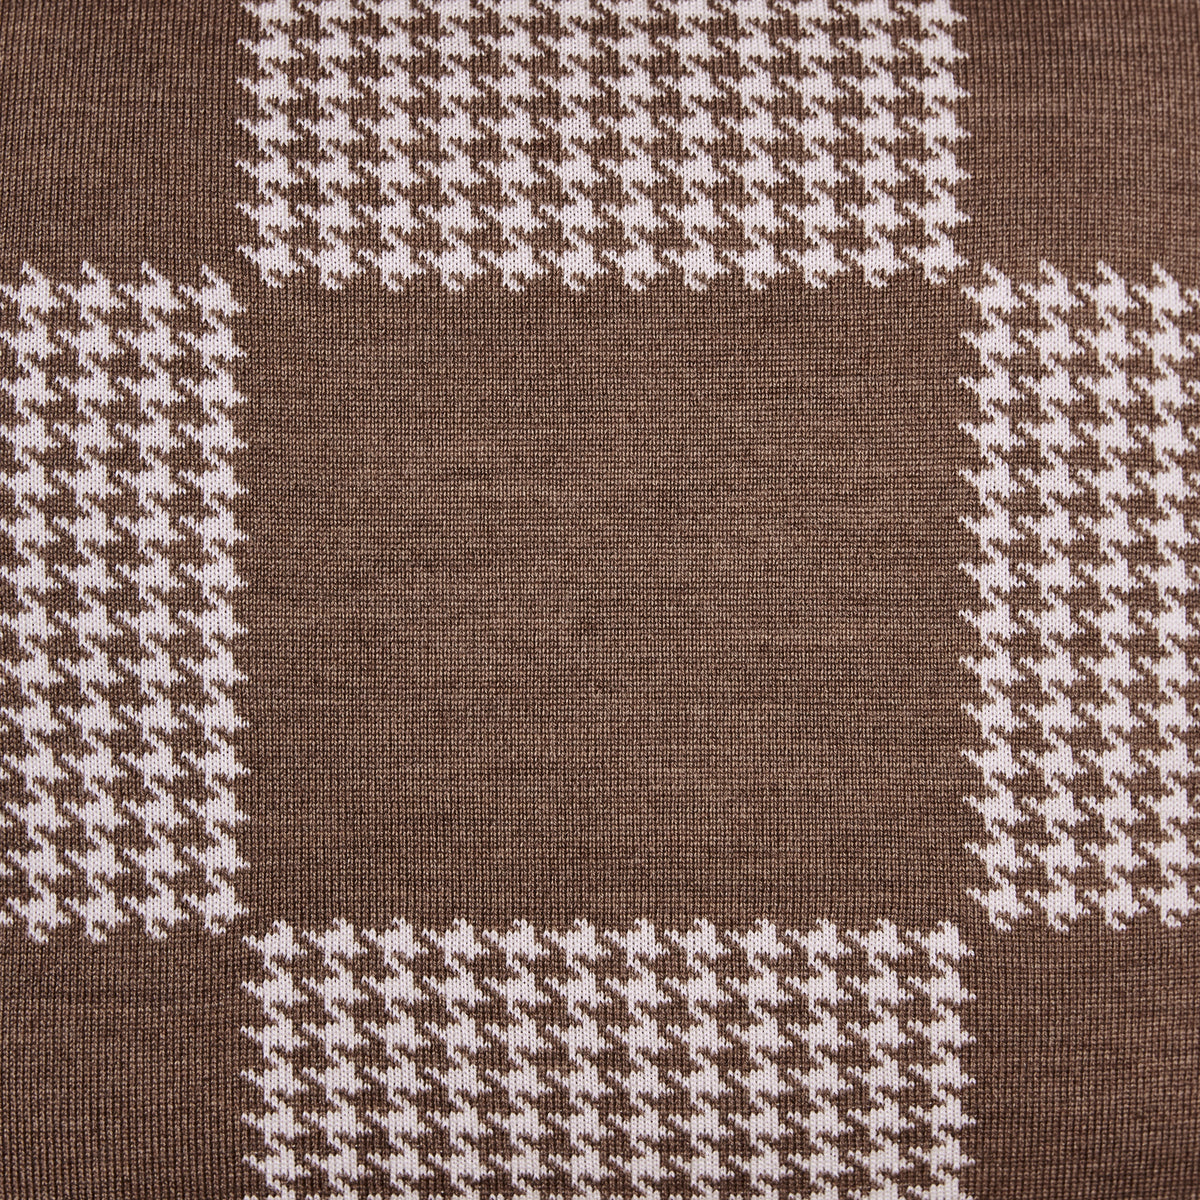 Squared Patch Houndstooth Sand Brown and Seashell White Cushion